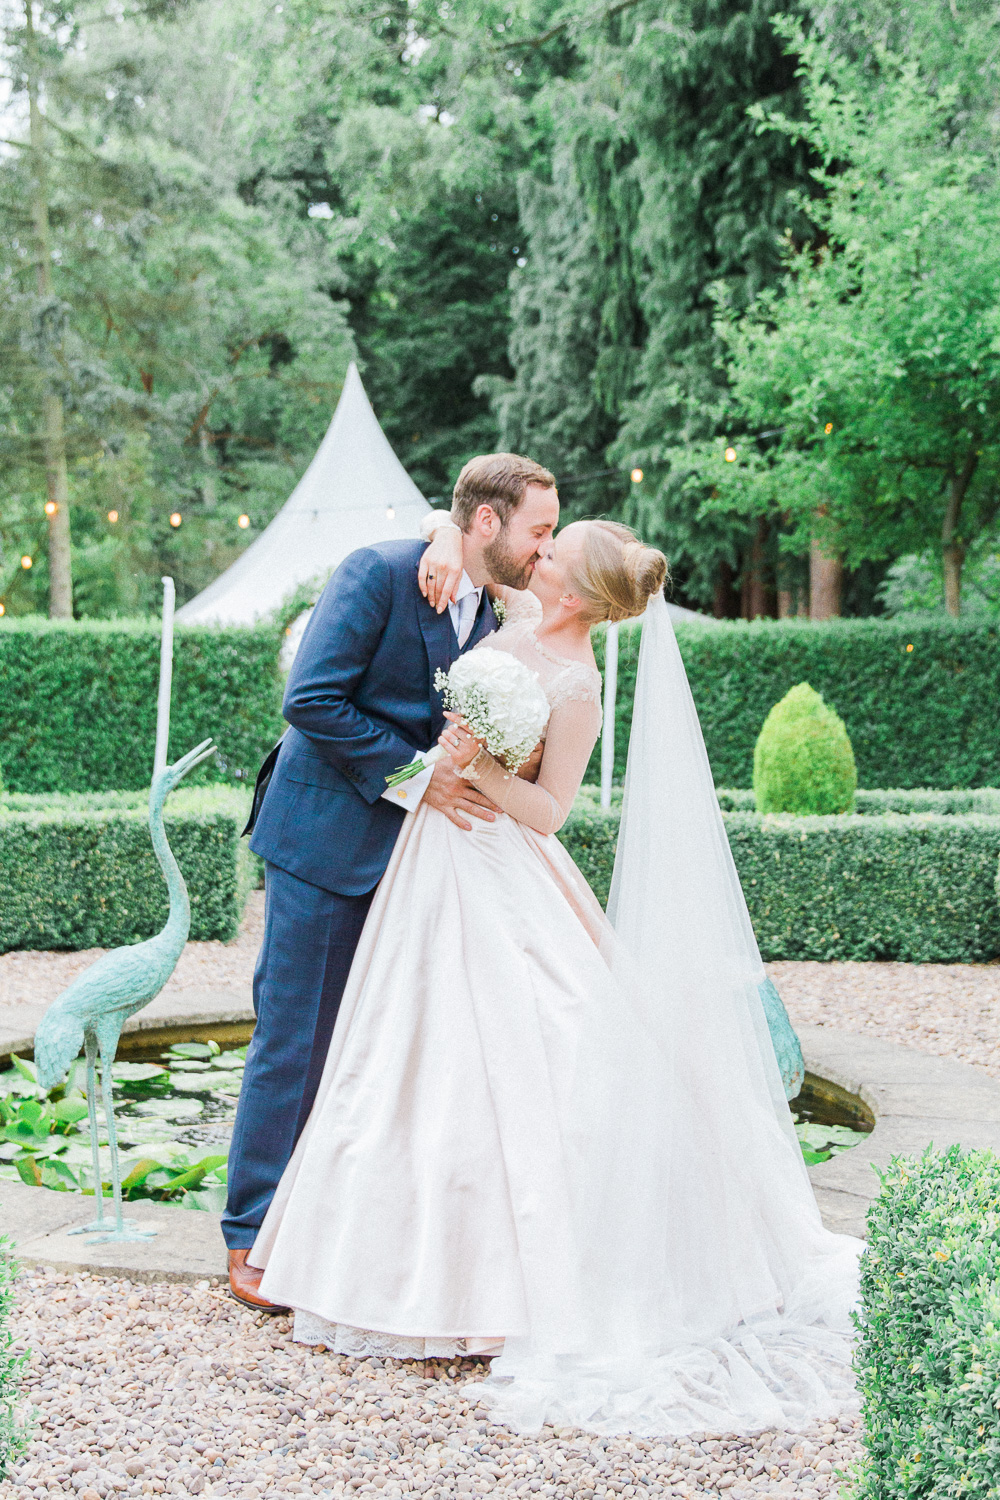 Bride and groom kissing at their English garden wedding